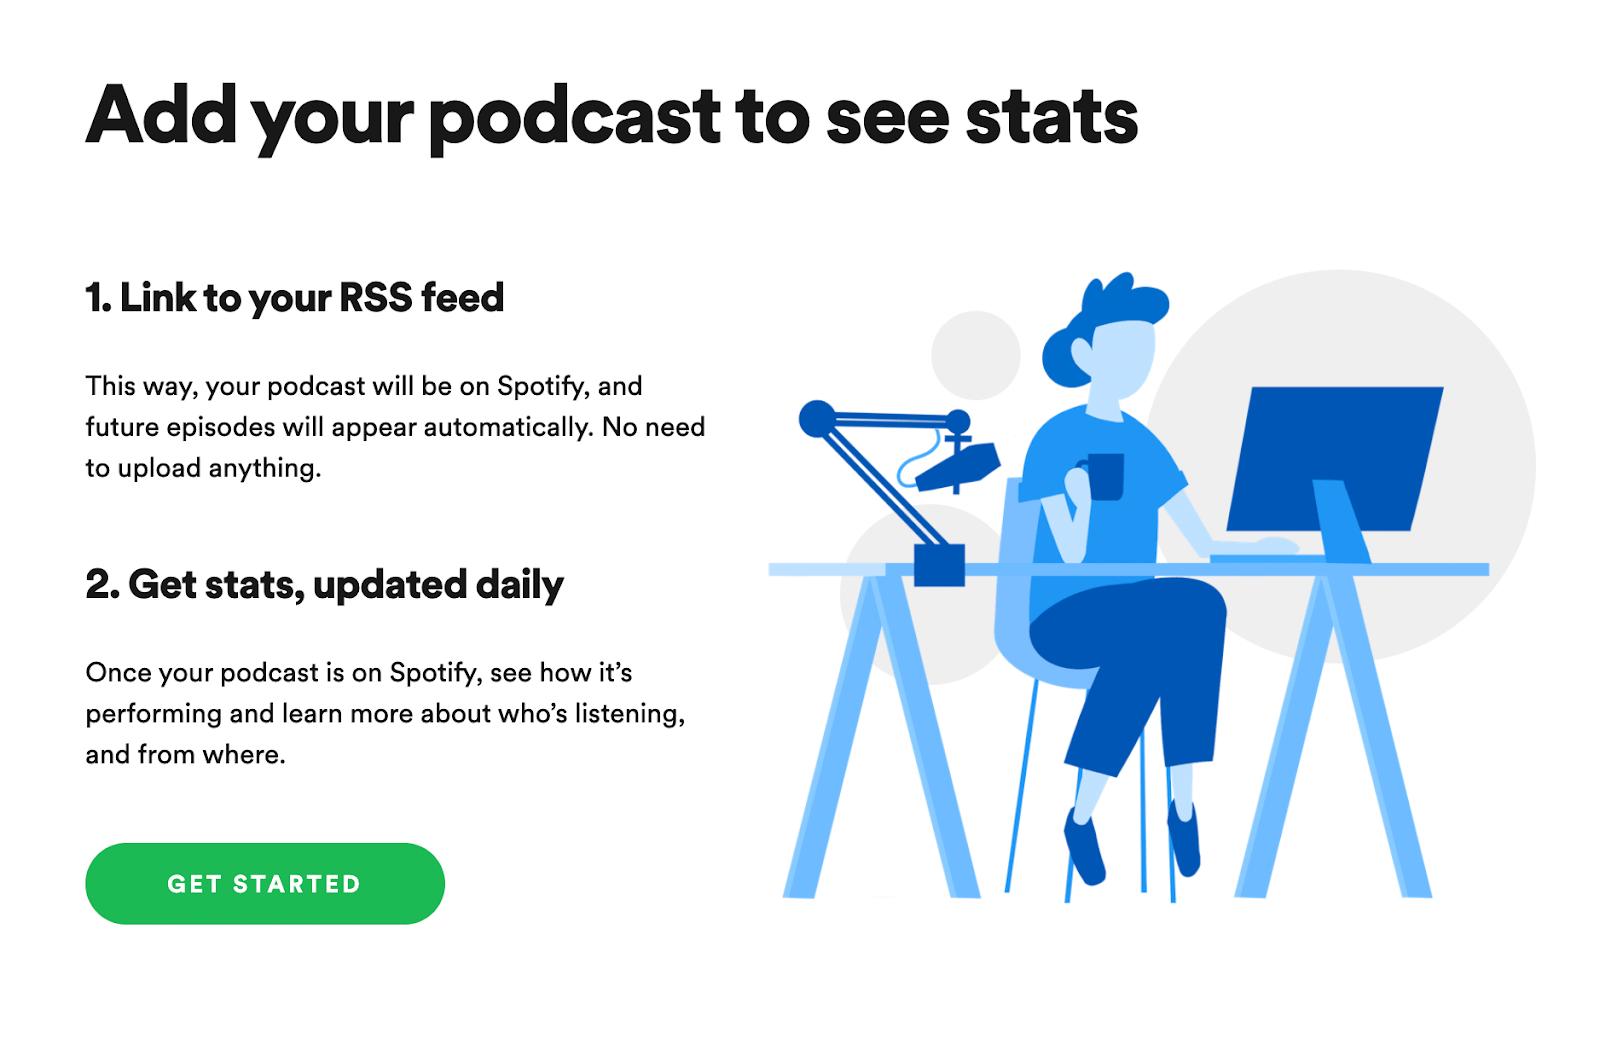 Adding a podcast on Spotify using an RSS feed link.